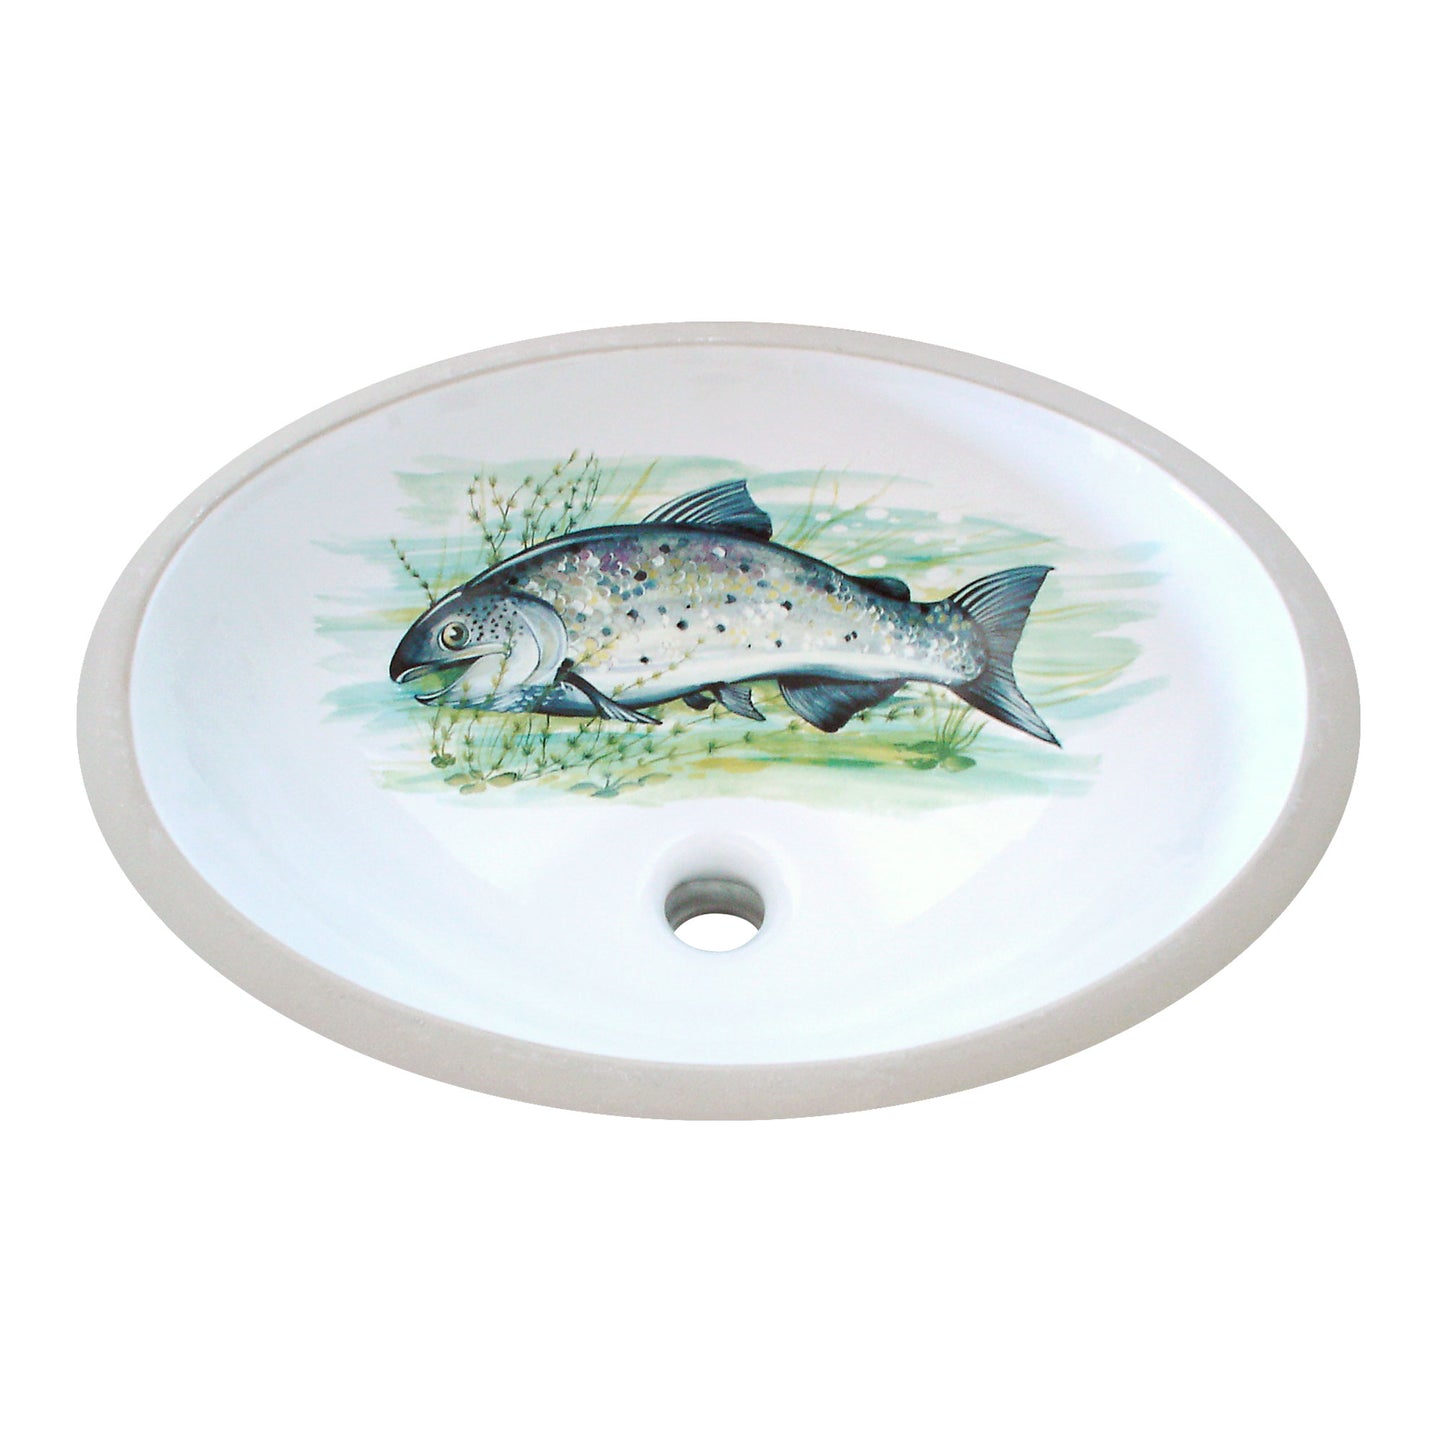 Beautifully hand painted salmon swimming in seaweed in shades of green and blue on an under mount sink make it a perfect fit for a lodge or fishing cabin. 